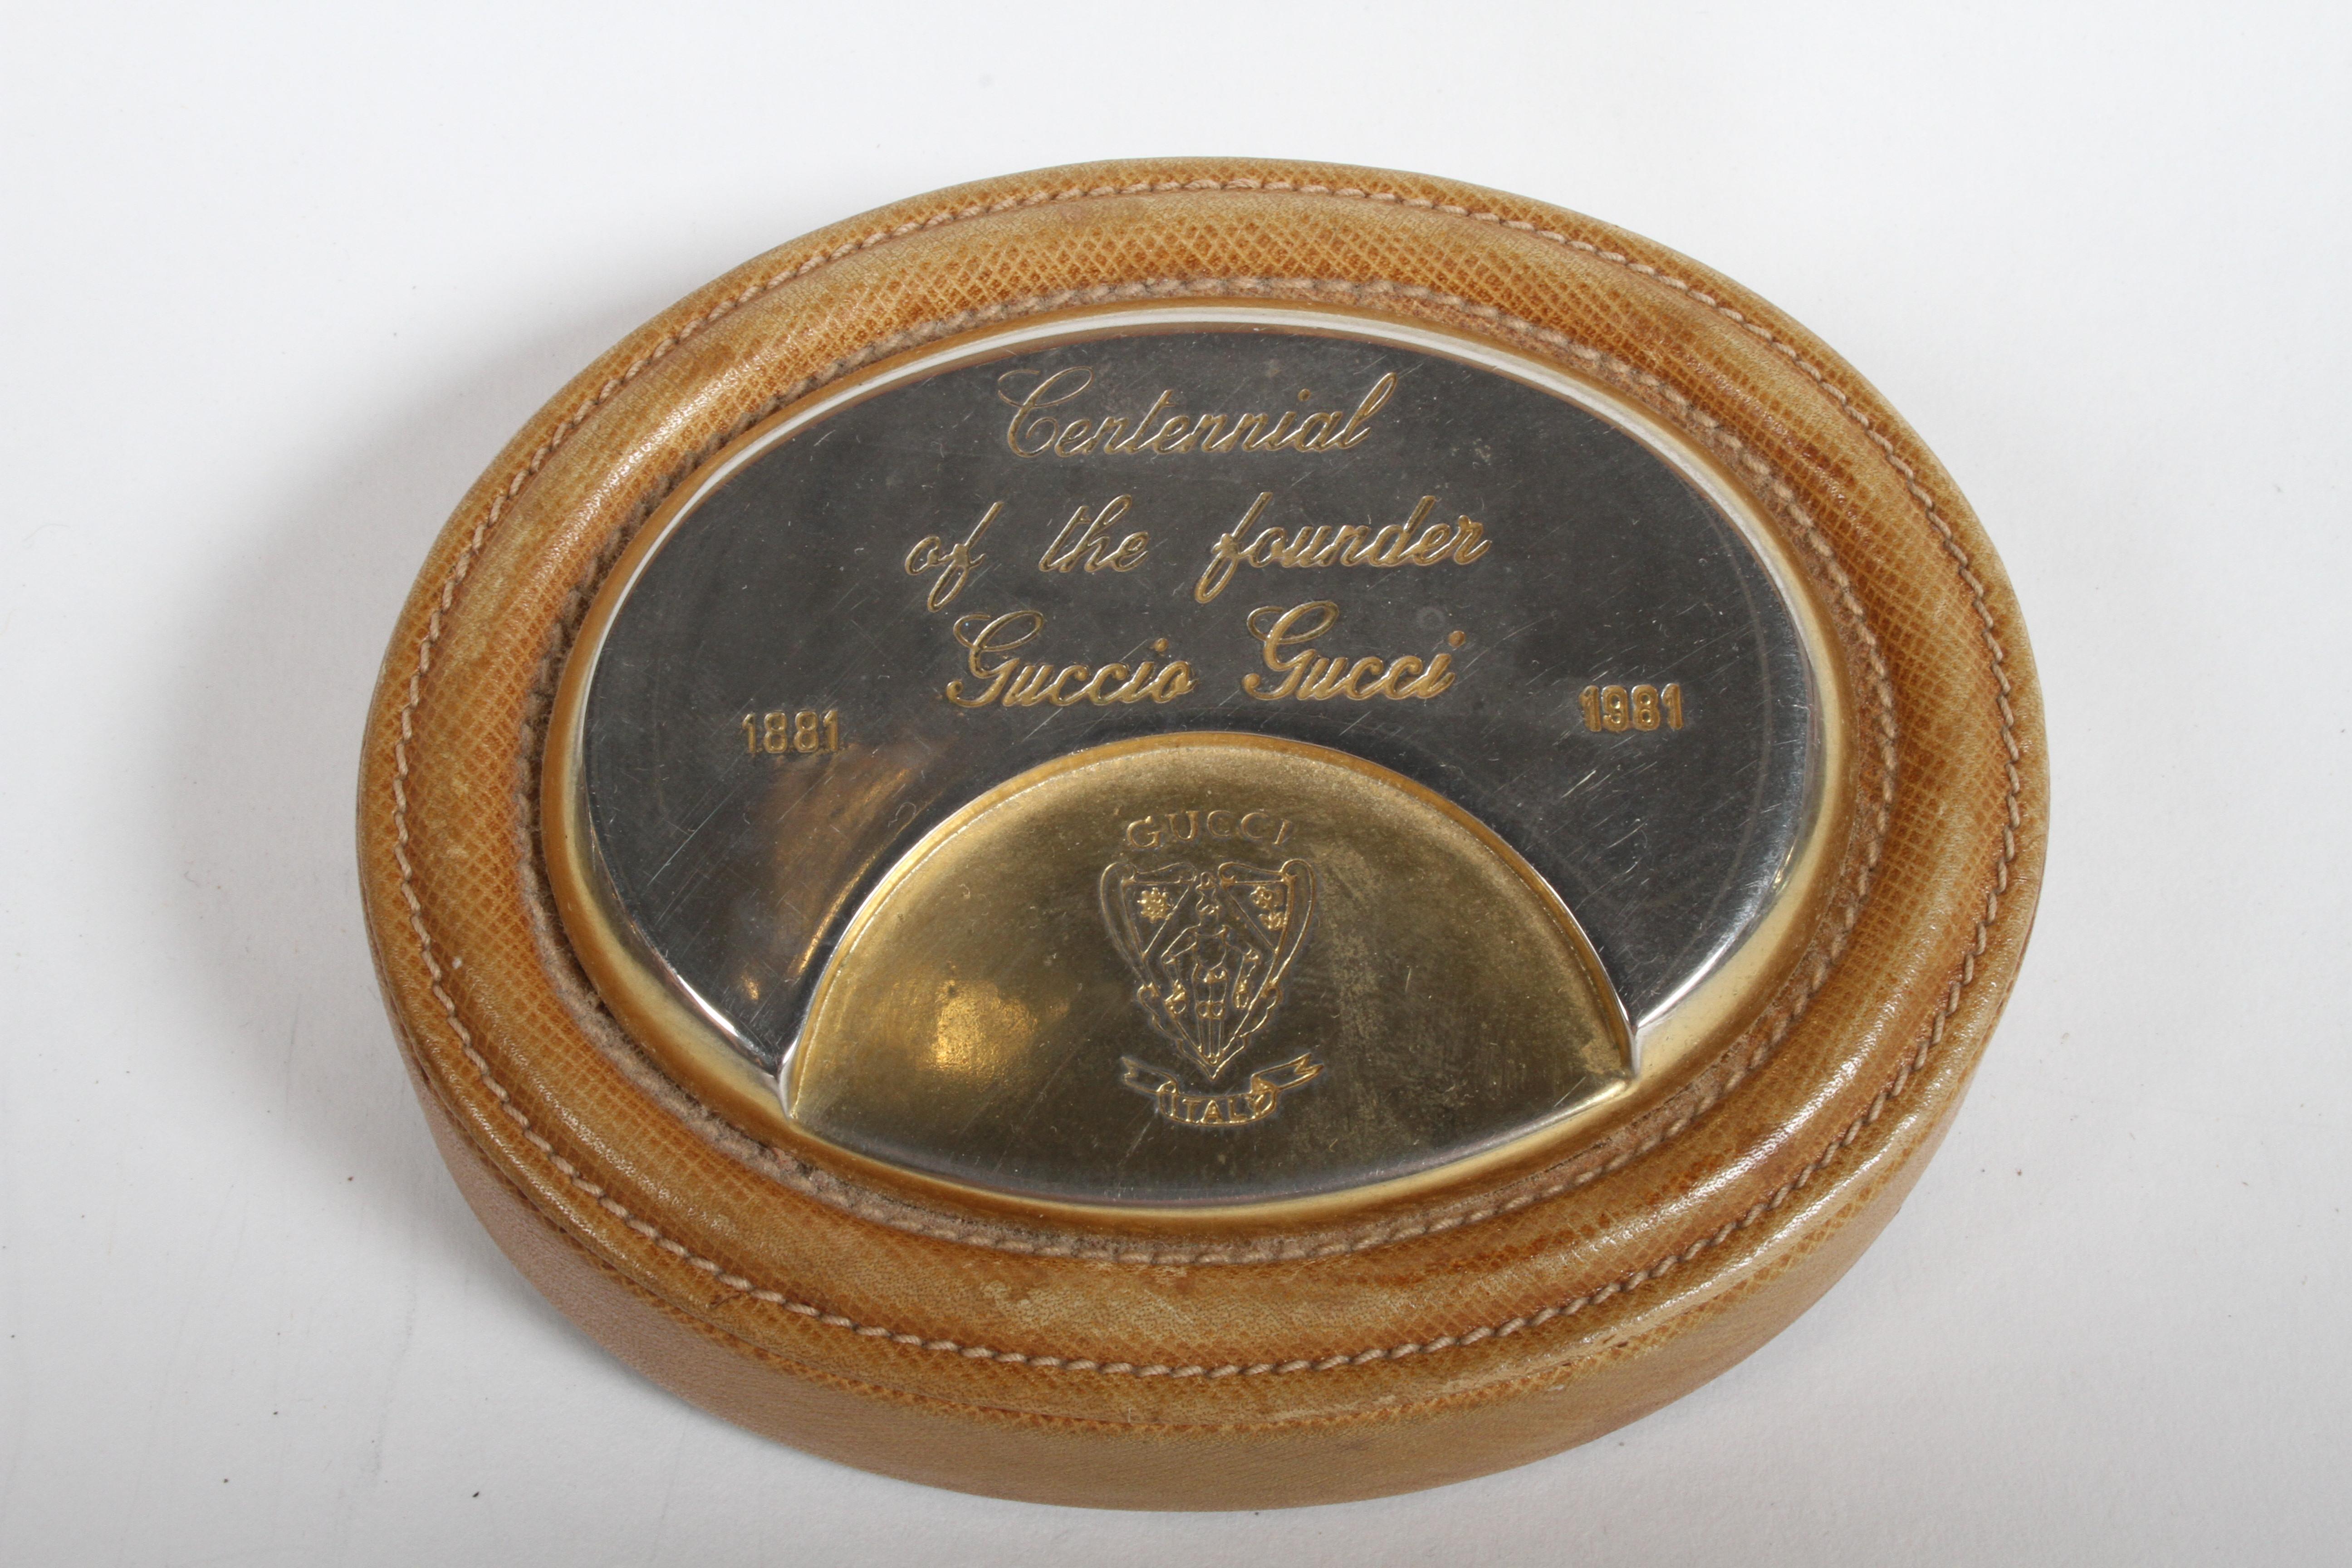 From the estate of the former owners of the Gucci Store in Plaza Frontenac - St. Louis. Is a Gucci desk paperweight, leather and plated gold, for the centennial of the founder Guccio Gucci (1891-1991). Leather and plating show wear.